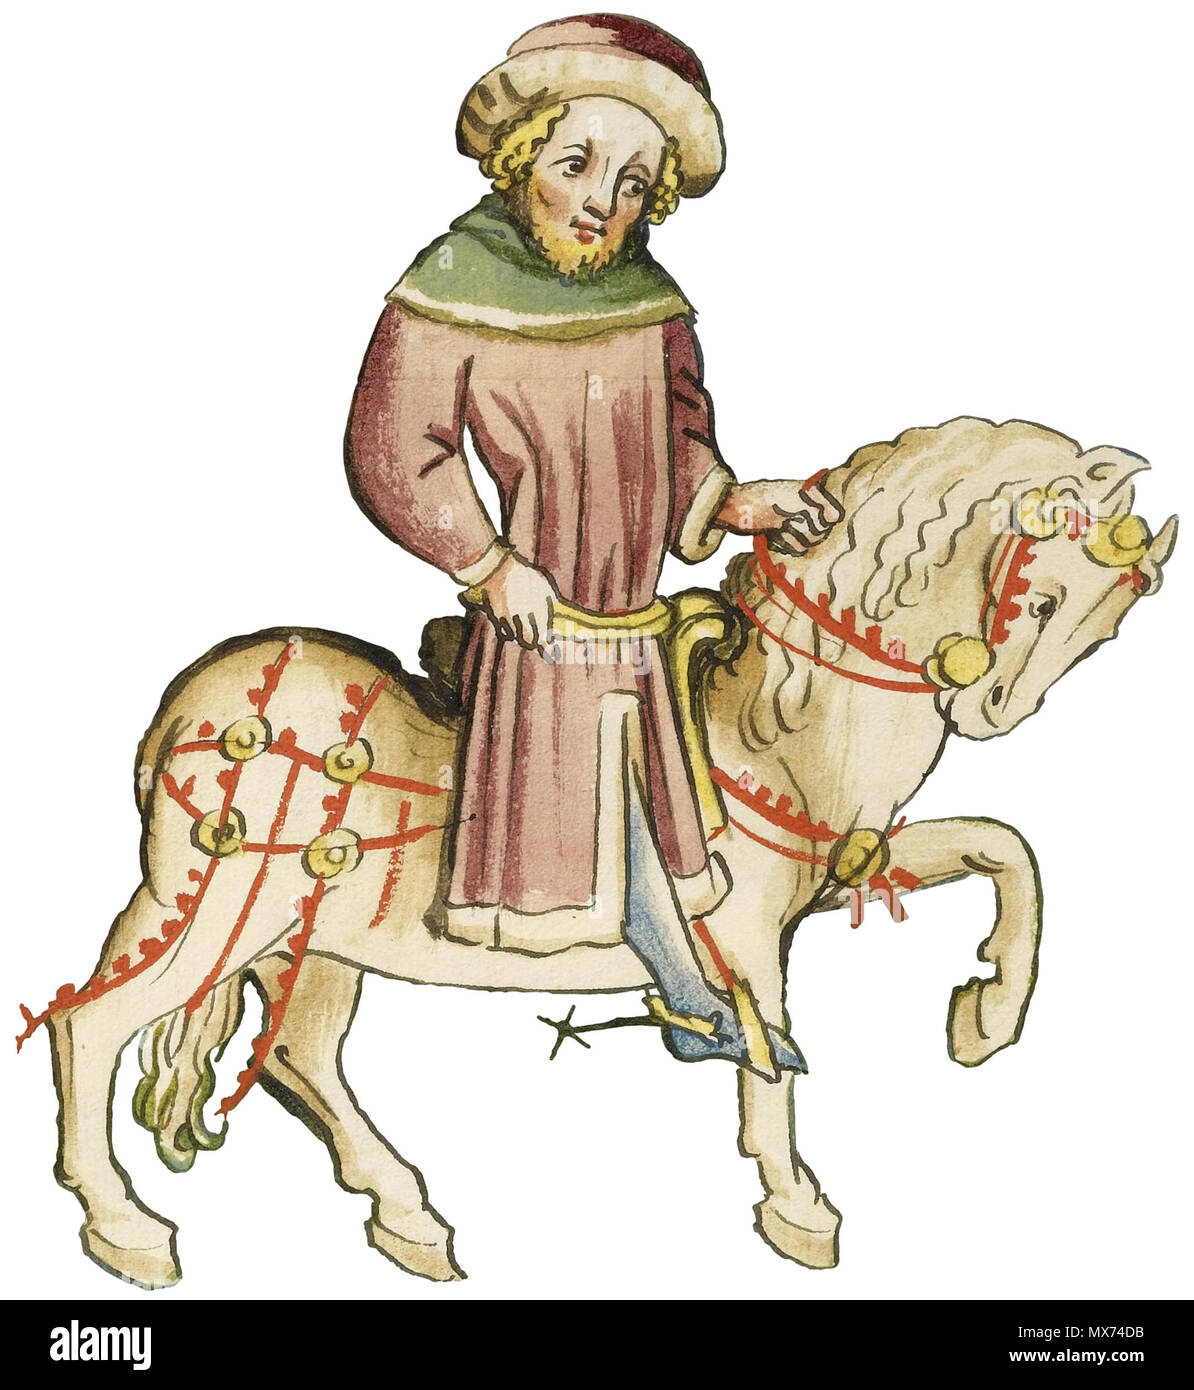 . Eberhard Windeck: Das Buch von Kaiser Sigismund (Handschrift bei Sotheby's 7.7.2009, siehe http://www.handschriftencensus.de/9134) [Not sure: folio 4v, the author Eberhardt Windeck on horseback riding away from his parents' house for the first time; OR folio 6r, the author again on horseback, having ridden down the Rhine, arriving at the entrance to the city of Cologne, surmounted by his arms] . circa 1440-50. Illustrator aus der Werkstatt von Diebold Lauber 103 Buch-kaiser-sigismund-L09740-26-lr-10 Stock Photo